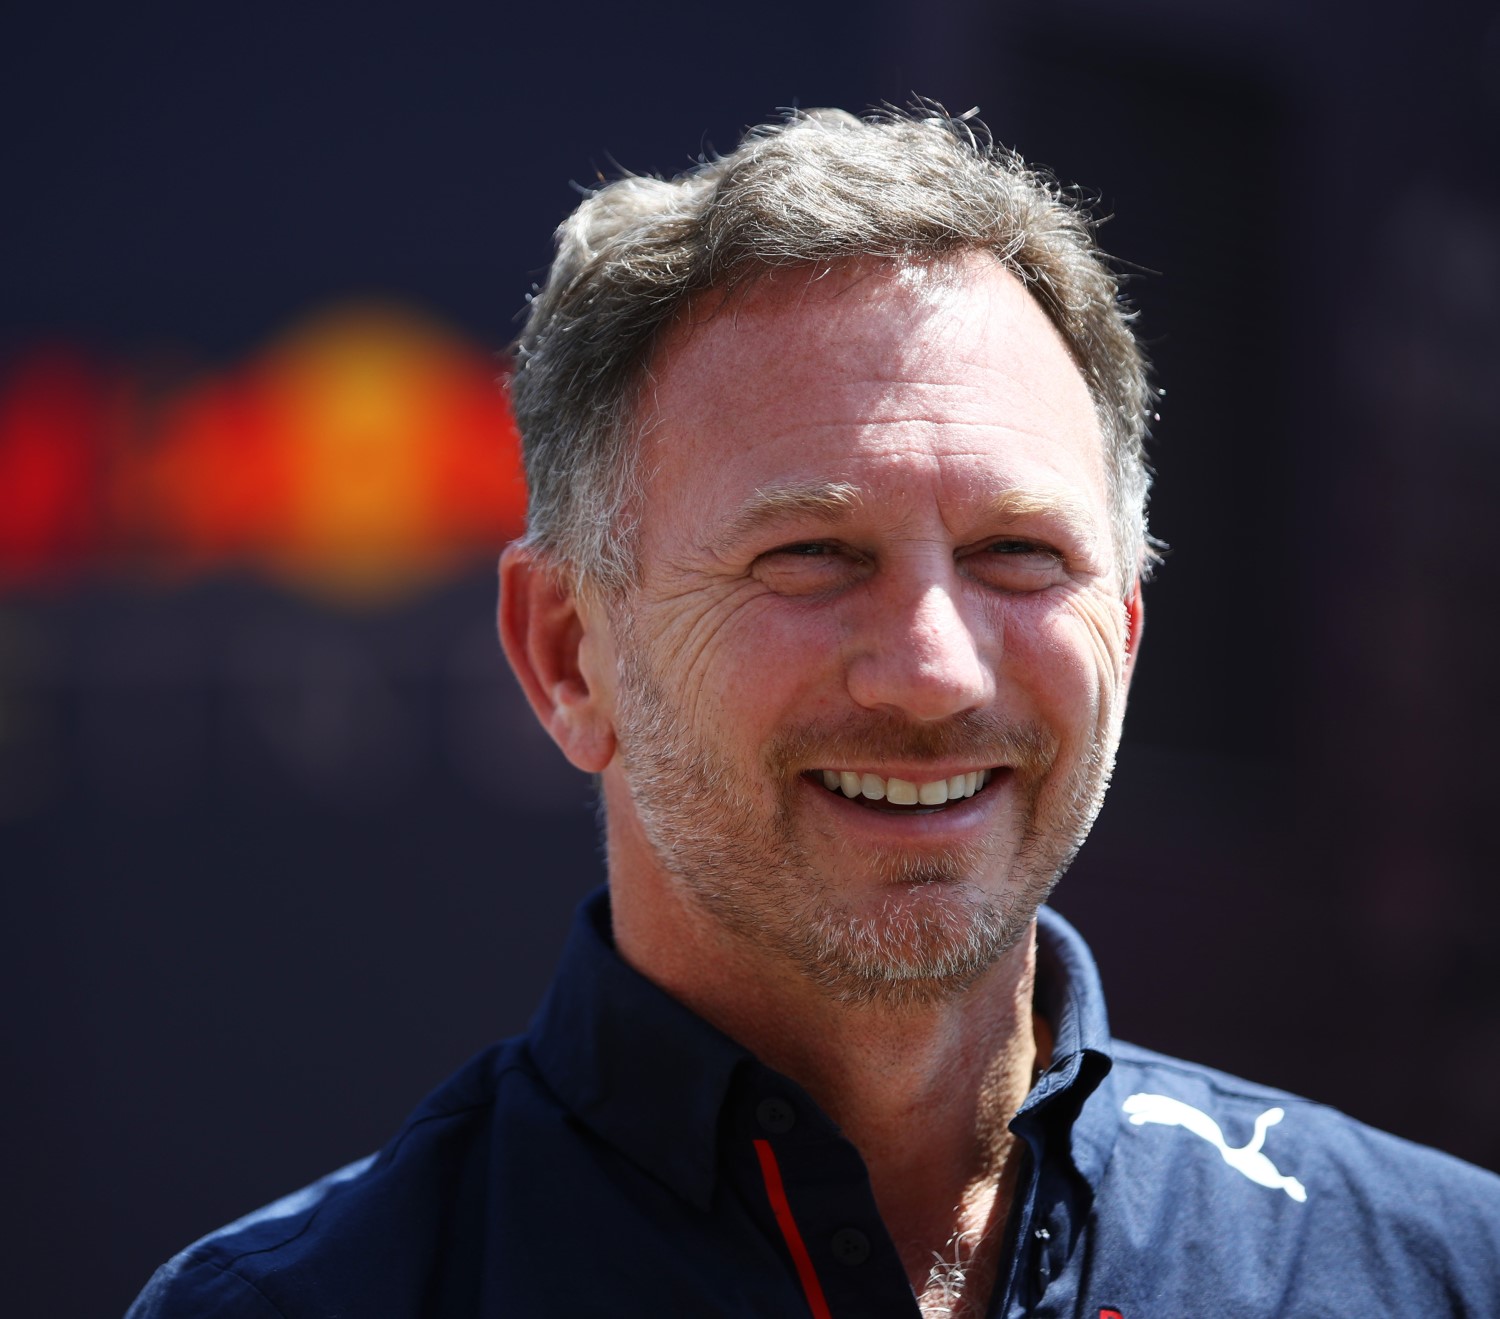 Red Bull Racing Team Principal Christian Horner looks on in the Paddock during final practice ahead of the F1 Grand Prix of Austria at Red Bull Ring on July 03, 2021 in Spielberg, Austria. (Photo by Mark Thompson/Getty Images)